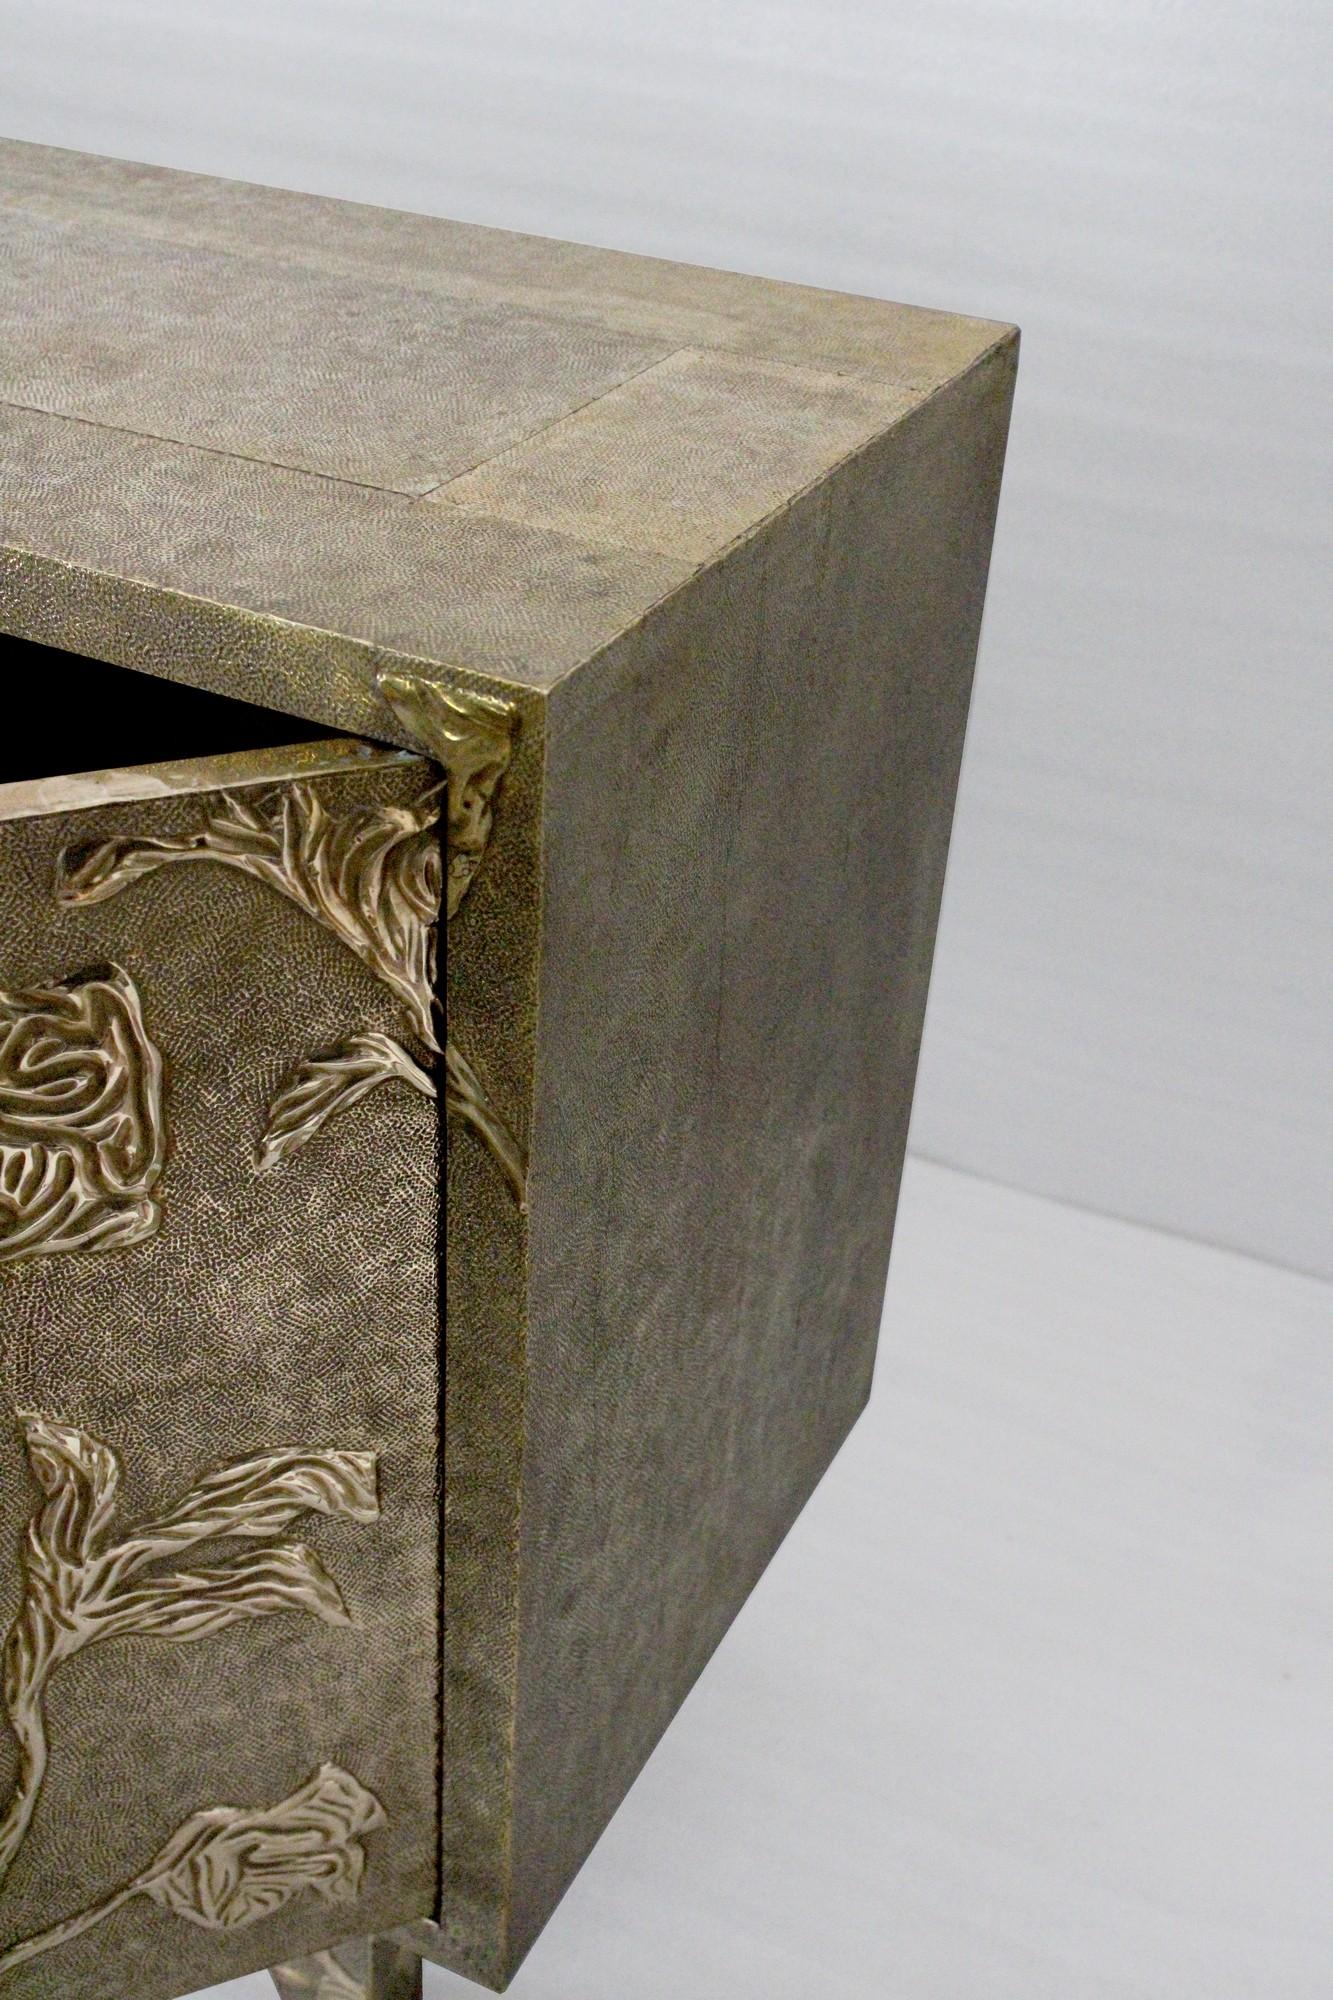 Metal Modern Credenza Sideboard in Floral Brass Clad, Handmade in India by S. Odegard For Sale